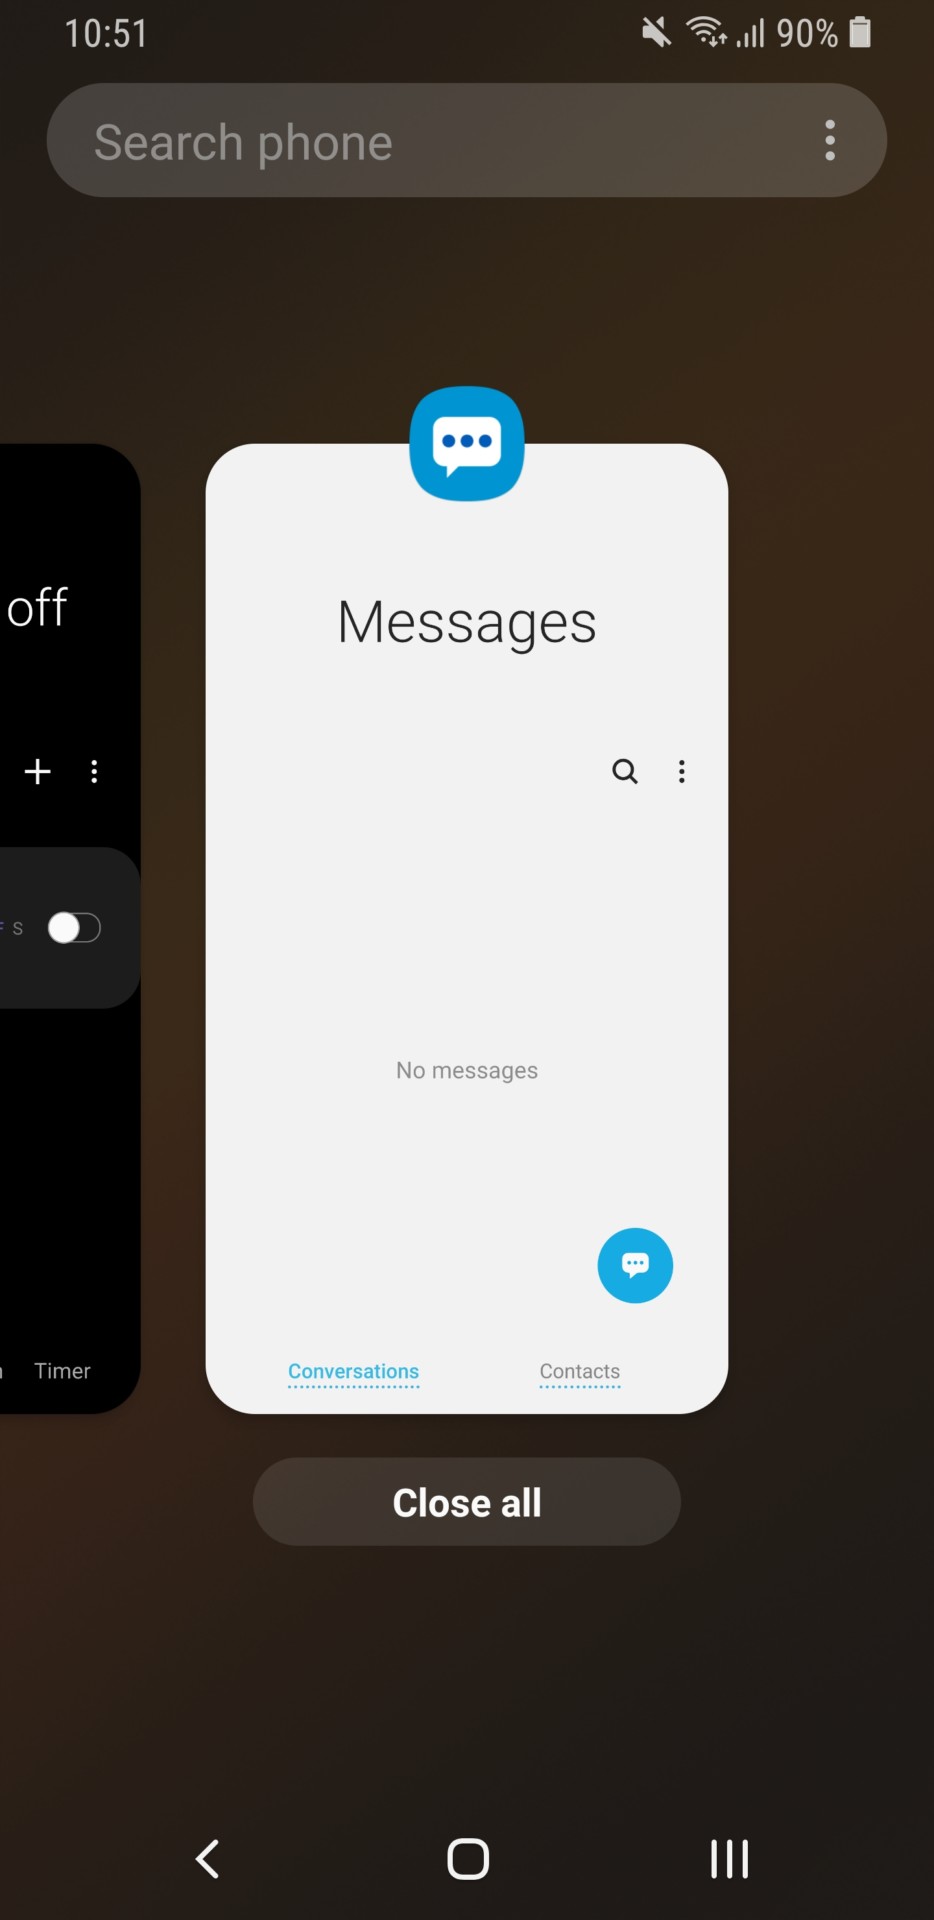 samsung galaxy s9 one ui review recent apps app switchr